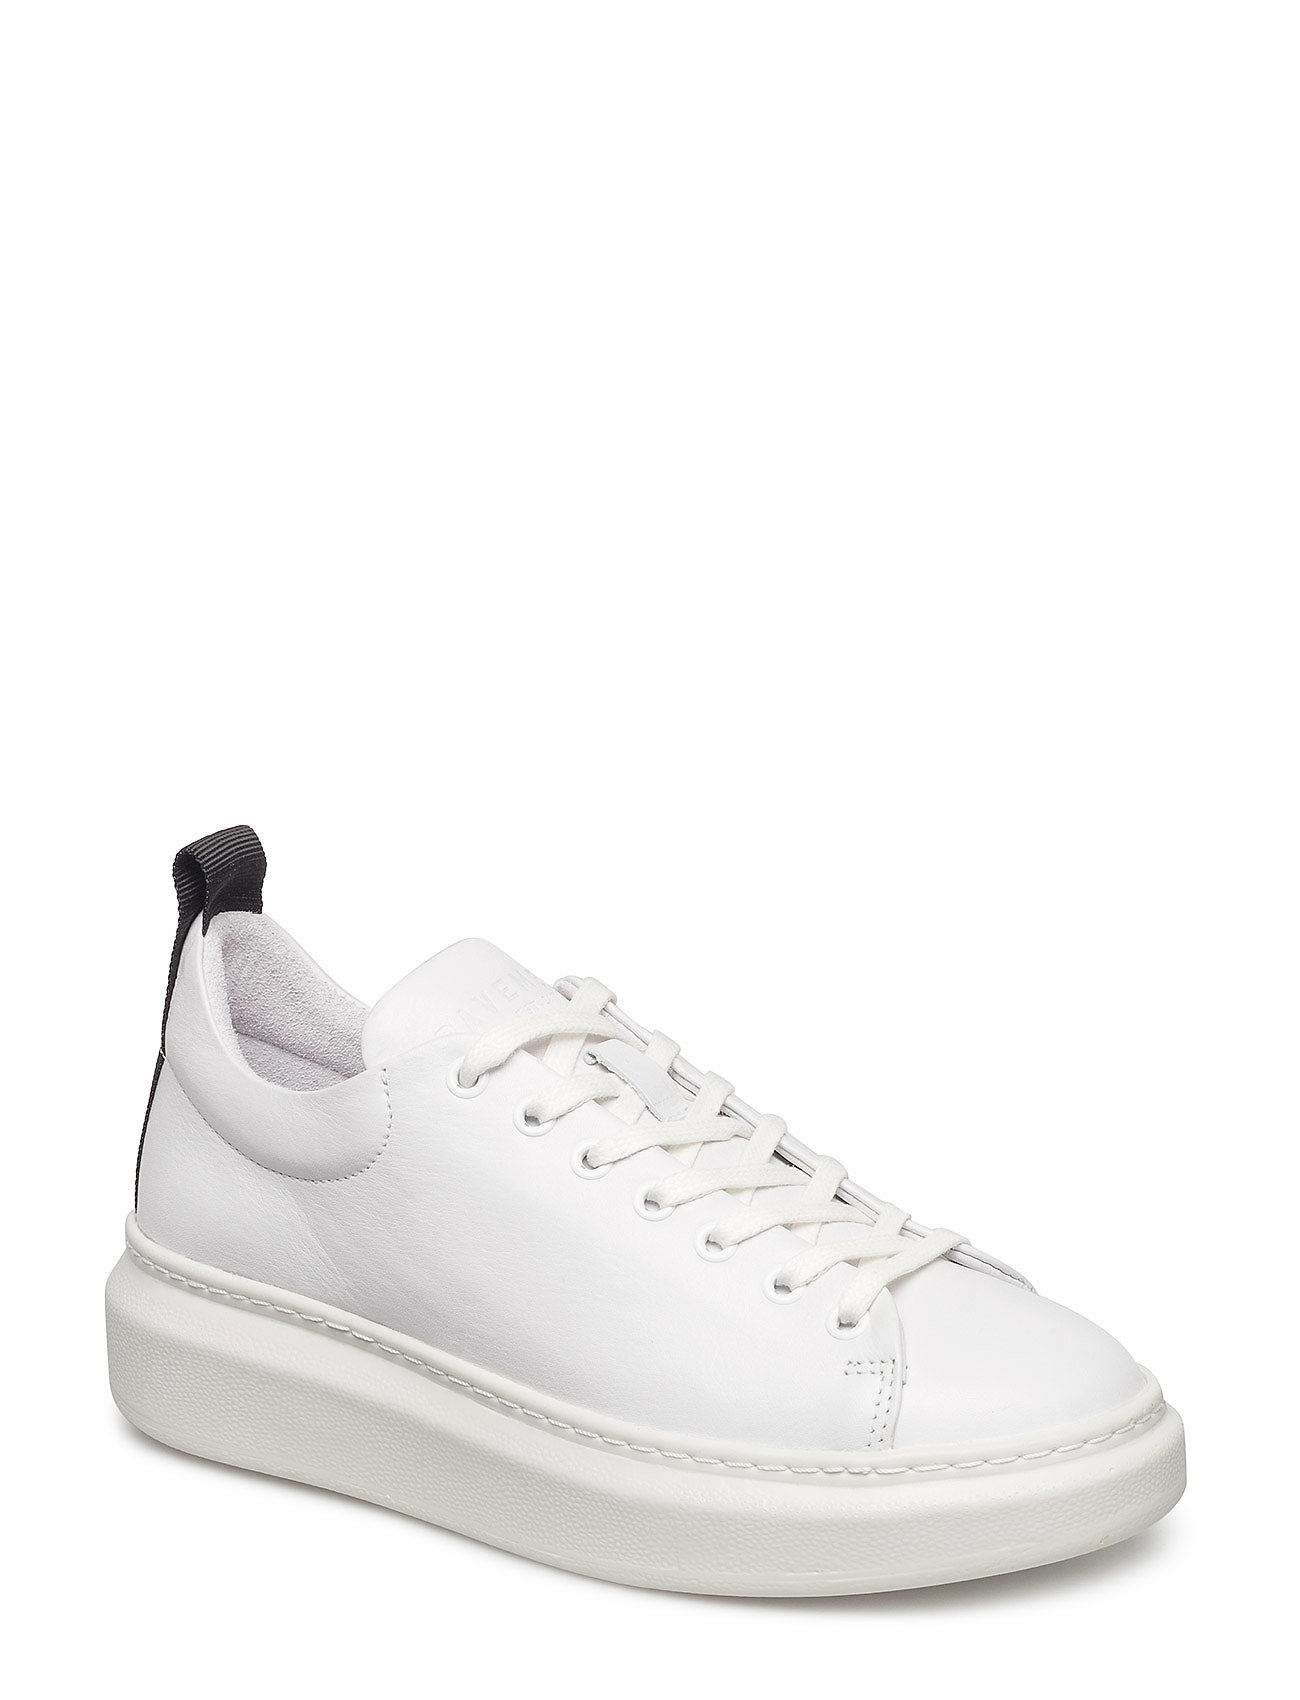 Post professionel hvor ofte Pavement Dee - Low top sneakers - Boozt.com